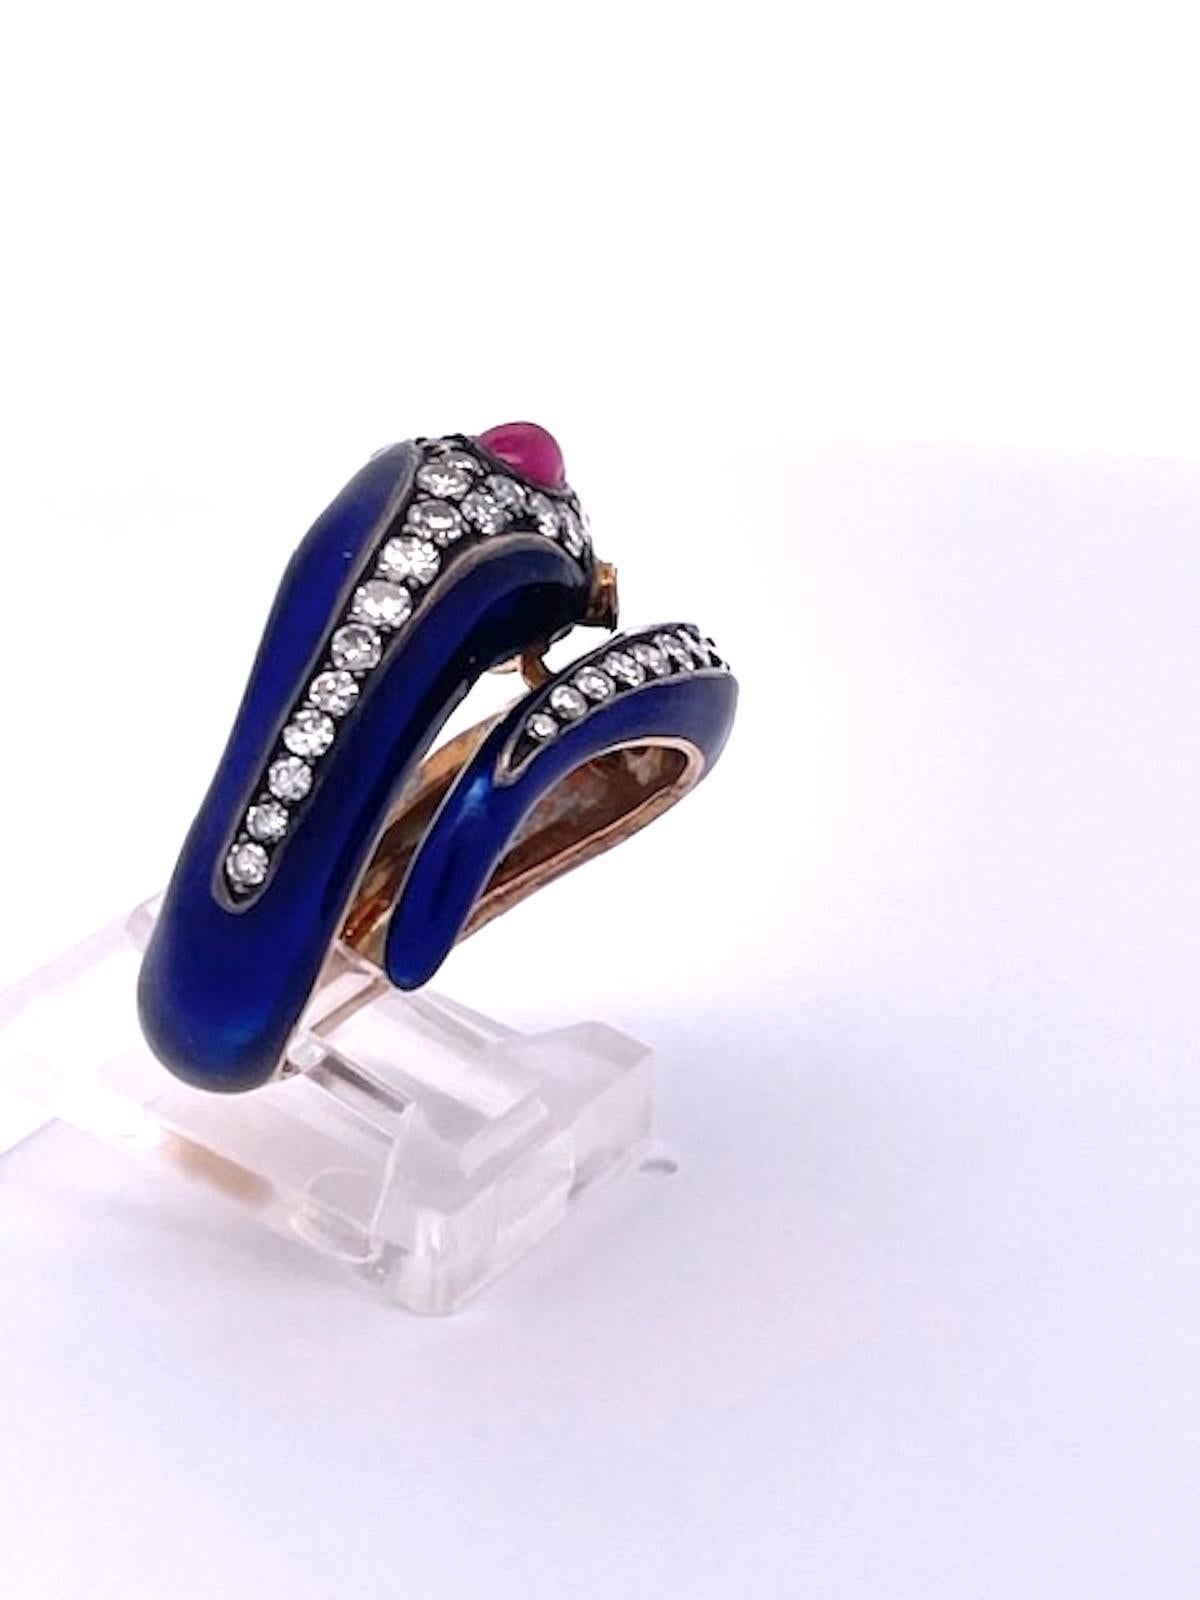 This 18K Snake Ring Cobalt Blue Enamel Rubies Diamonds  In Good Condition For Sale In North Hollywood, CA